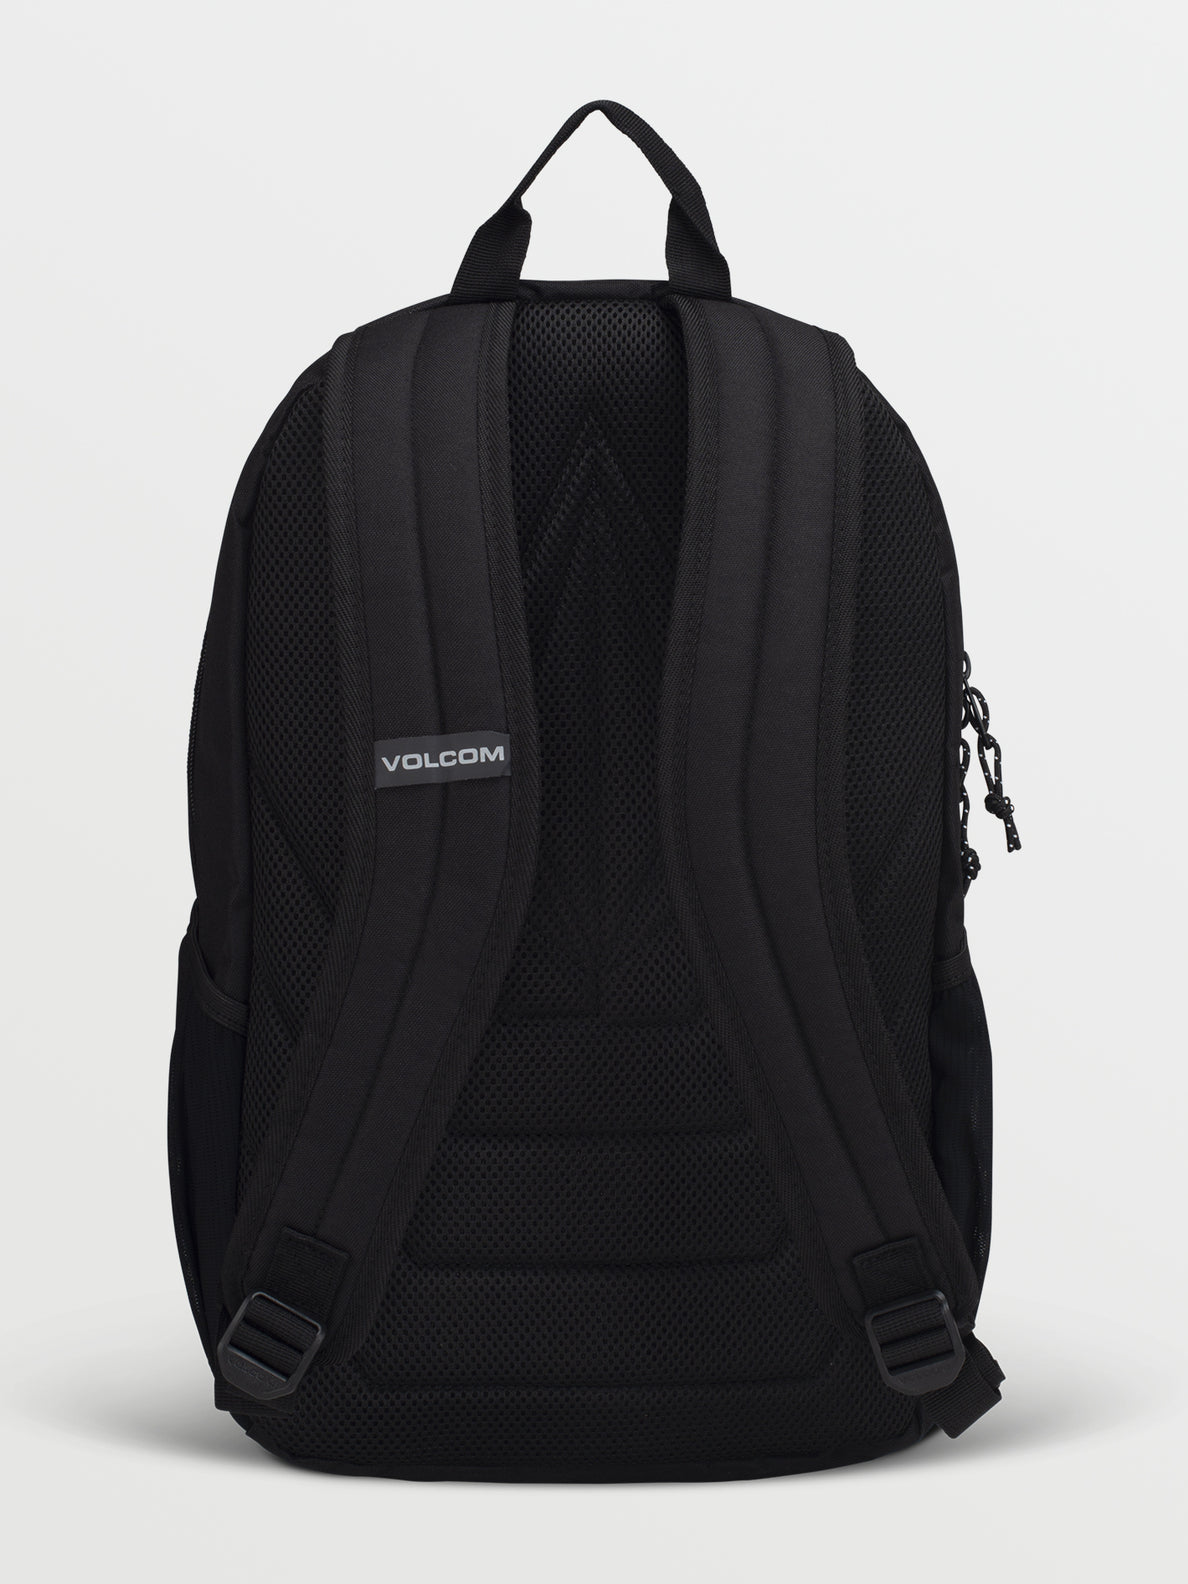 Launch Backpack - Black